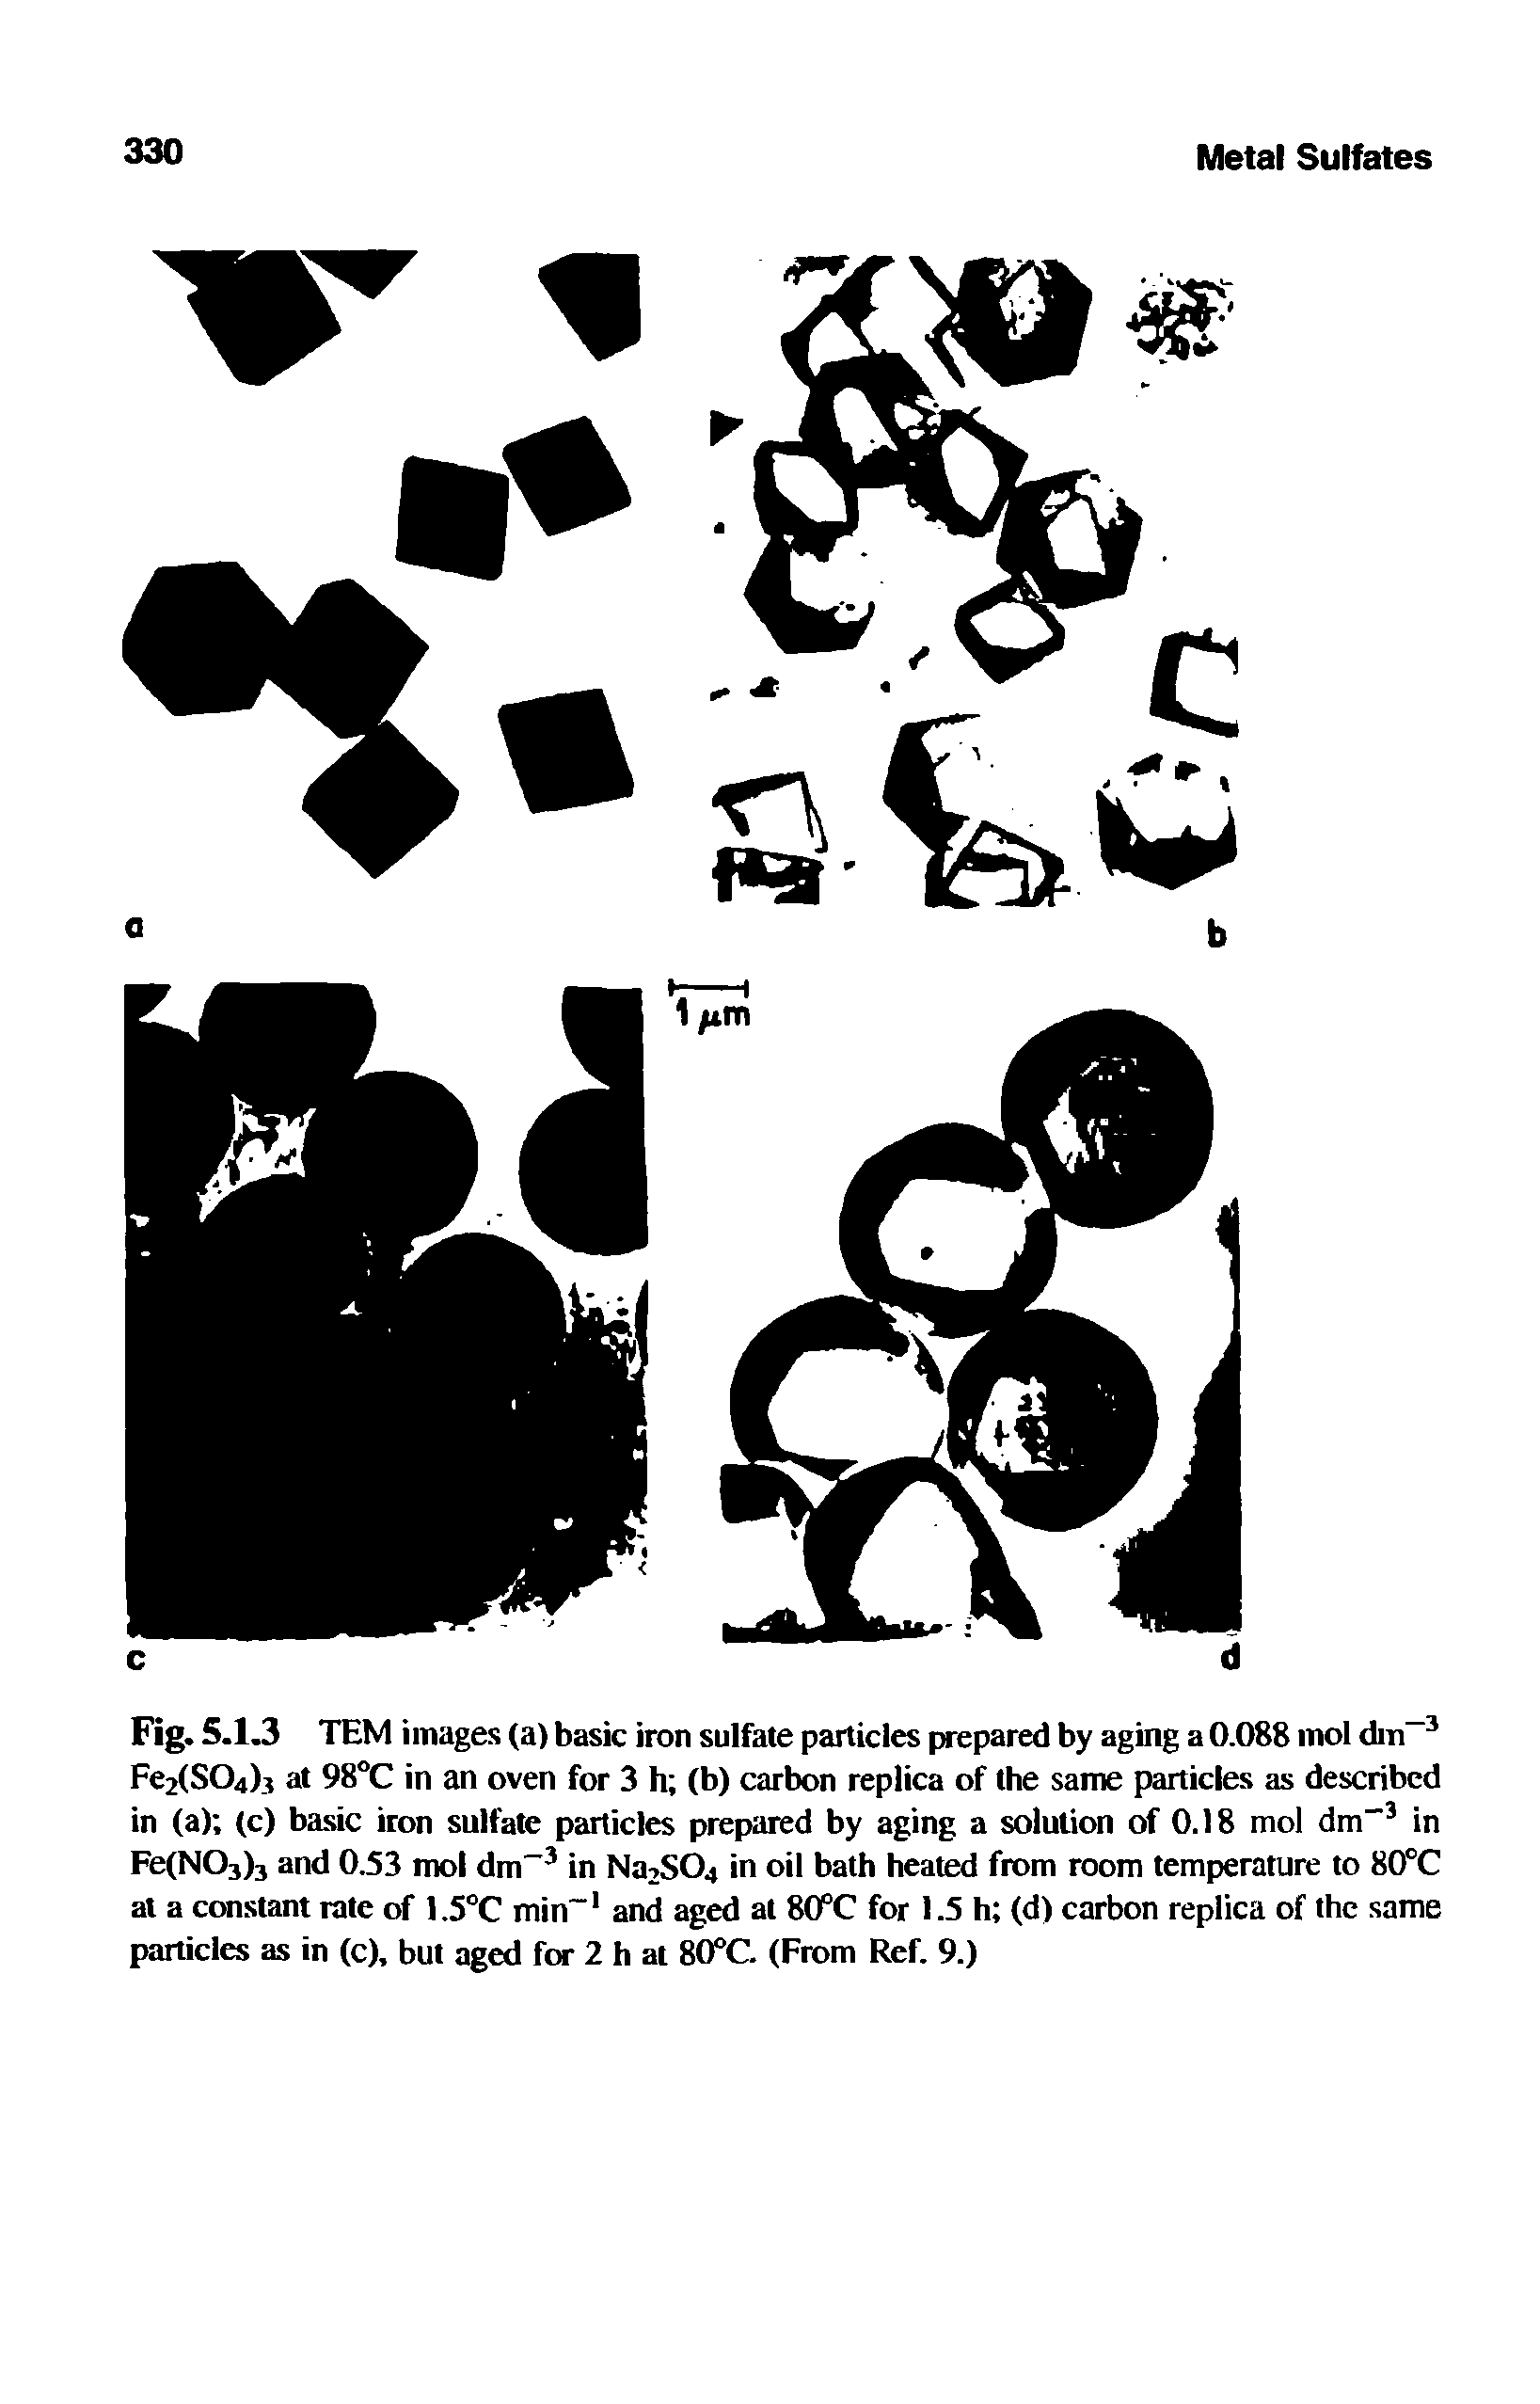 Fig. 5.1.3 TEM images (a) basic iron sulfate particles prepared by aging a 0.088 mol din-3 Fe2(S04)3 at 98°C in an oven for 3 h (b) carbon replica of the same particles as described in (a) (c) basic iron sulfate particles prepared by aging a solution of 0.18 mol dm-3 in Fe(N03)3 and 0.53 mol dm-3 in Na2S04 in oil bath heated from room temperature to 80°C at a constant rate of 1.5°C min-1 and aged at 80pC for 1.5 h (d) carbon replica of the same panicles as in (c), but aged for 2 h at 80°C. (From Ref. 9.)...